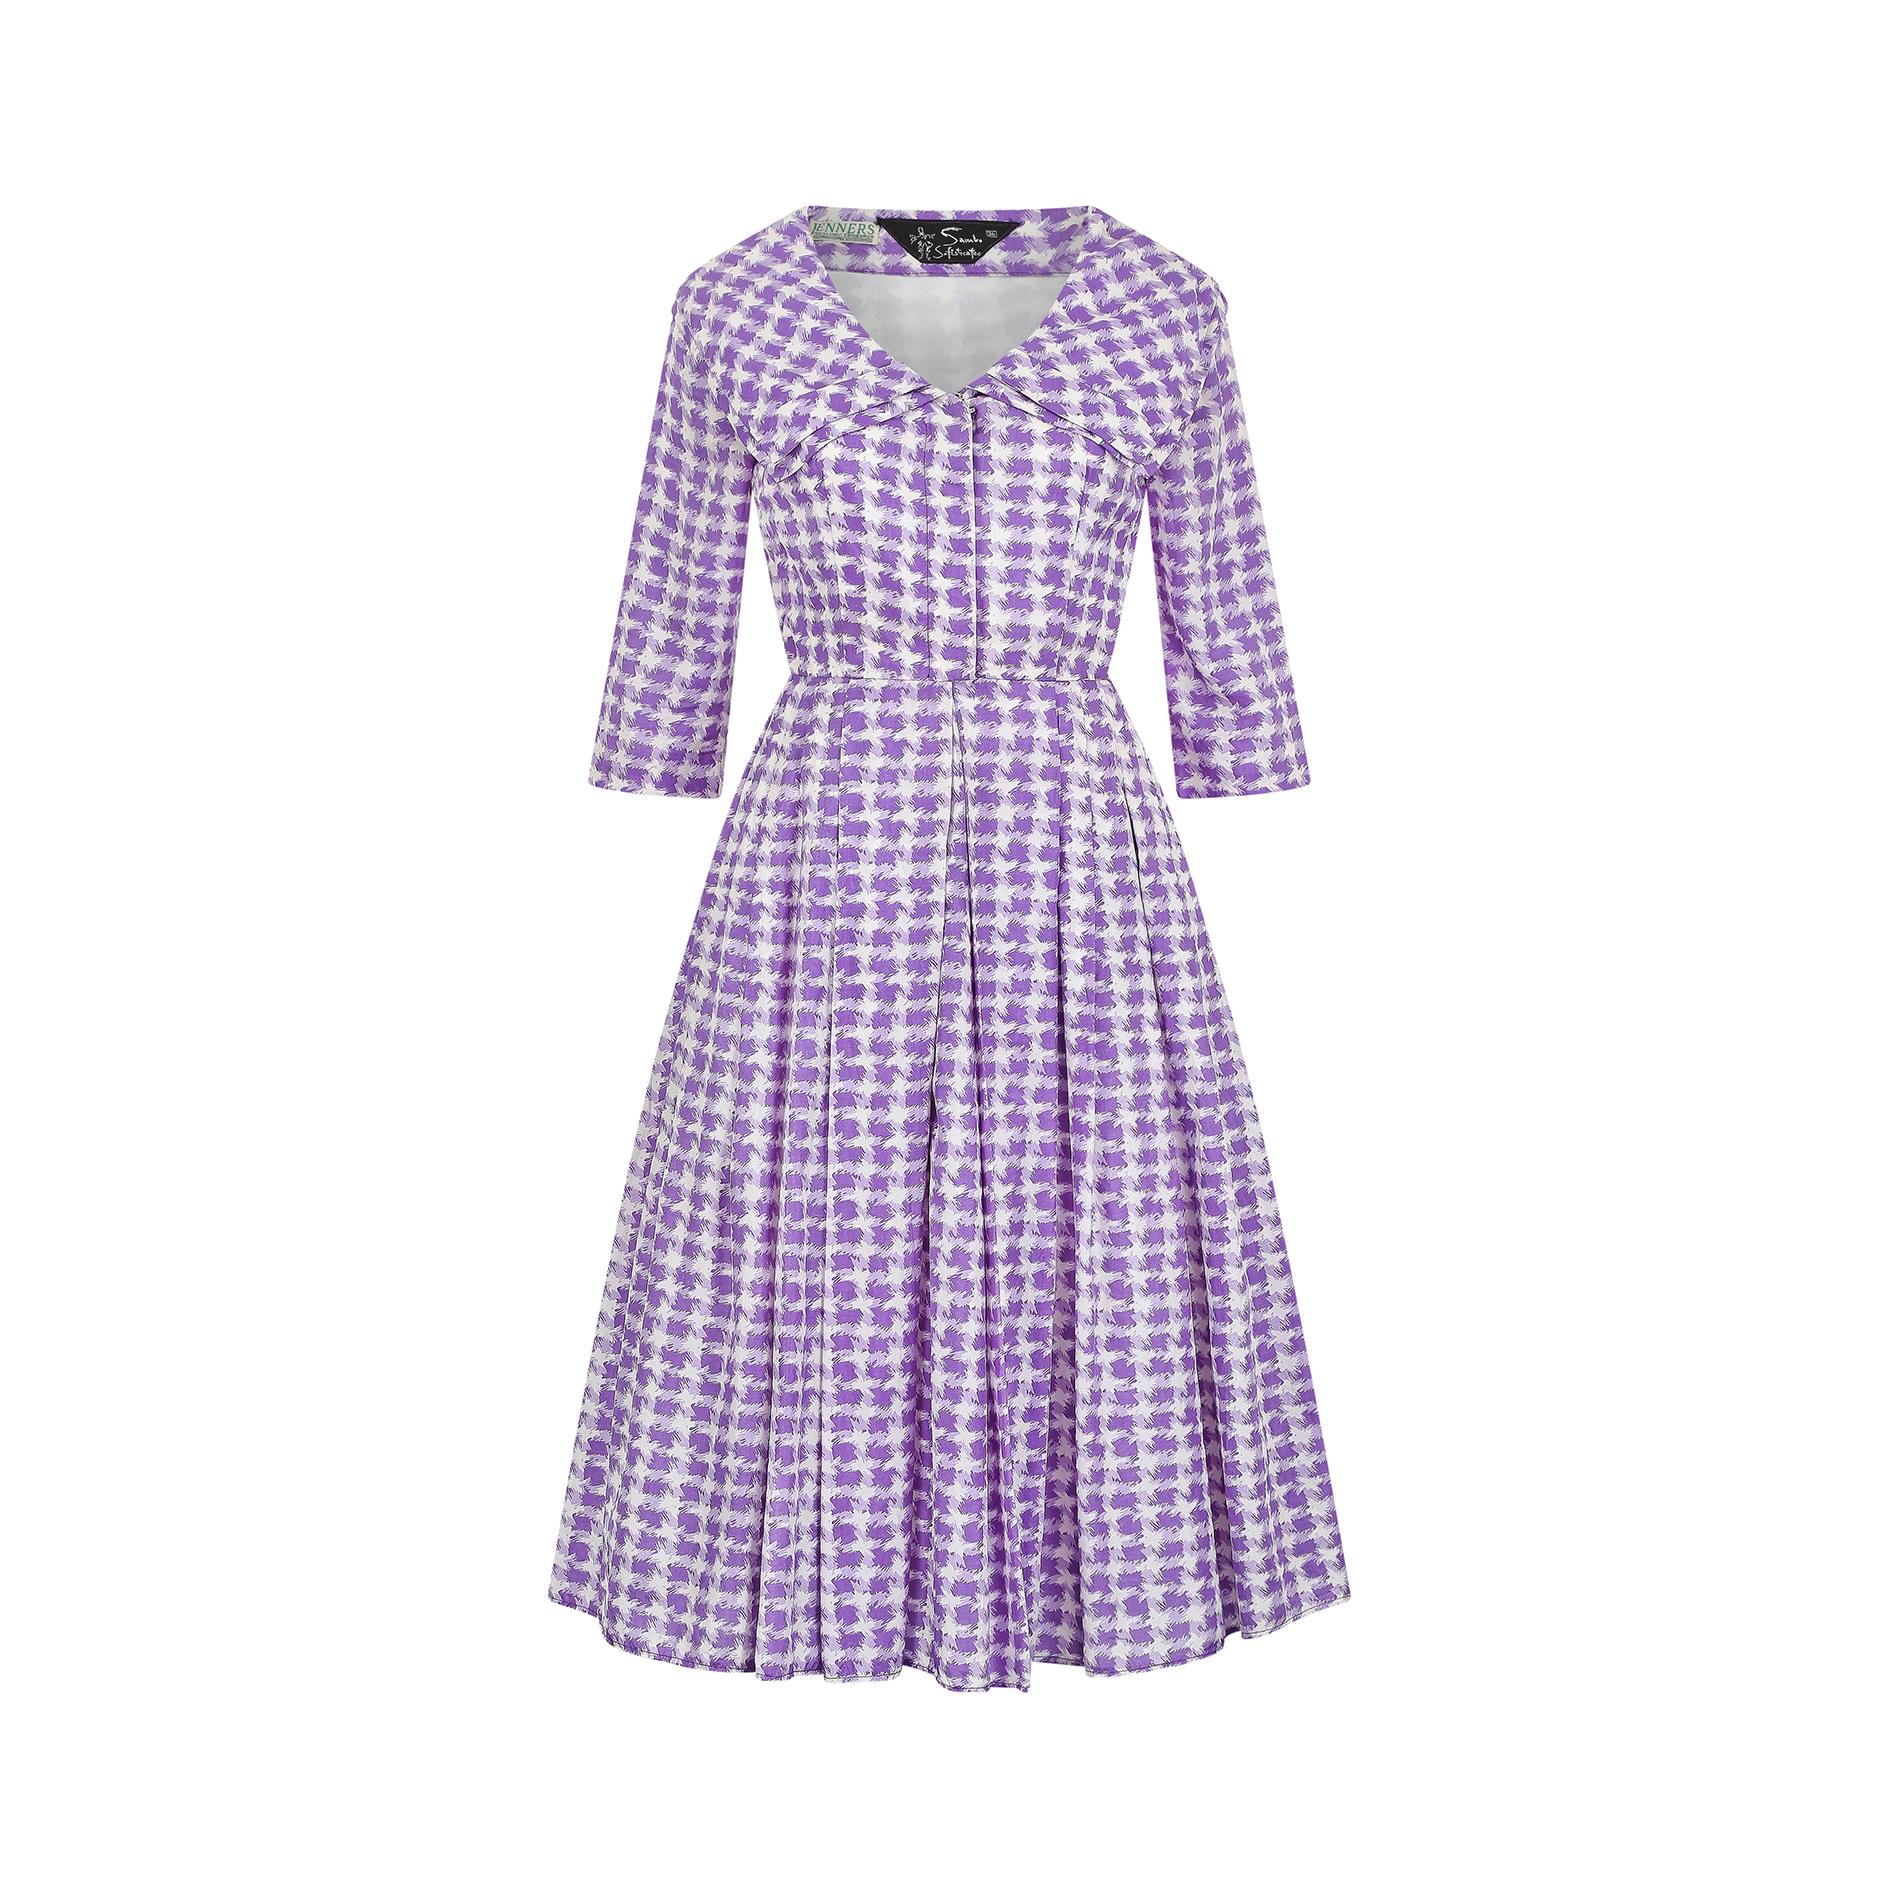 Sublime mid to late 1950s shirtwaister dress by Sambo Fashions, cut in a classic fit and flare style. It has a wide, bertha style collar and three quarter length sleeves which are slightly tapered. The dress fastens down the front with hook and